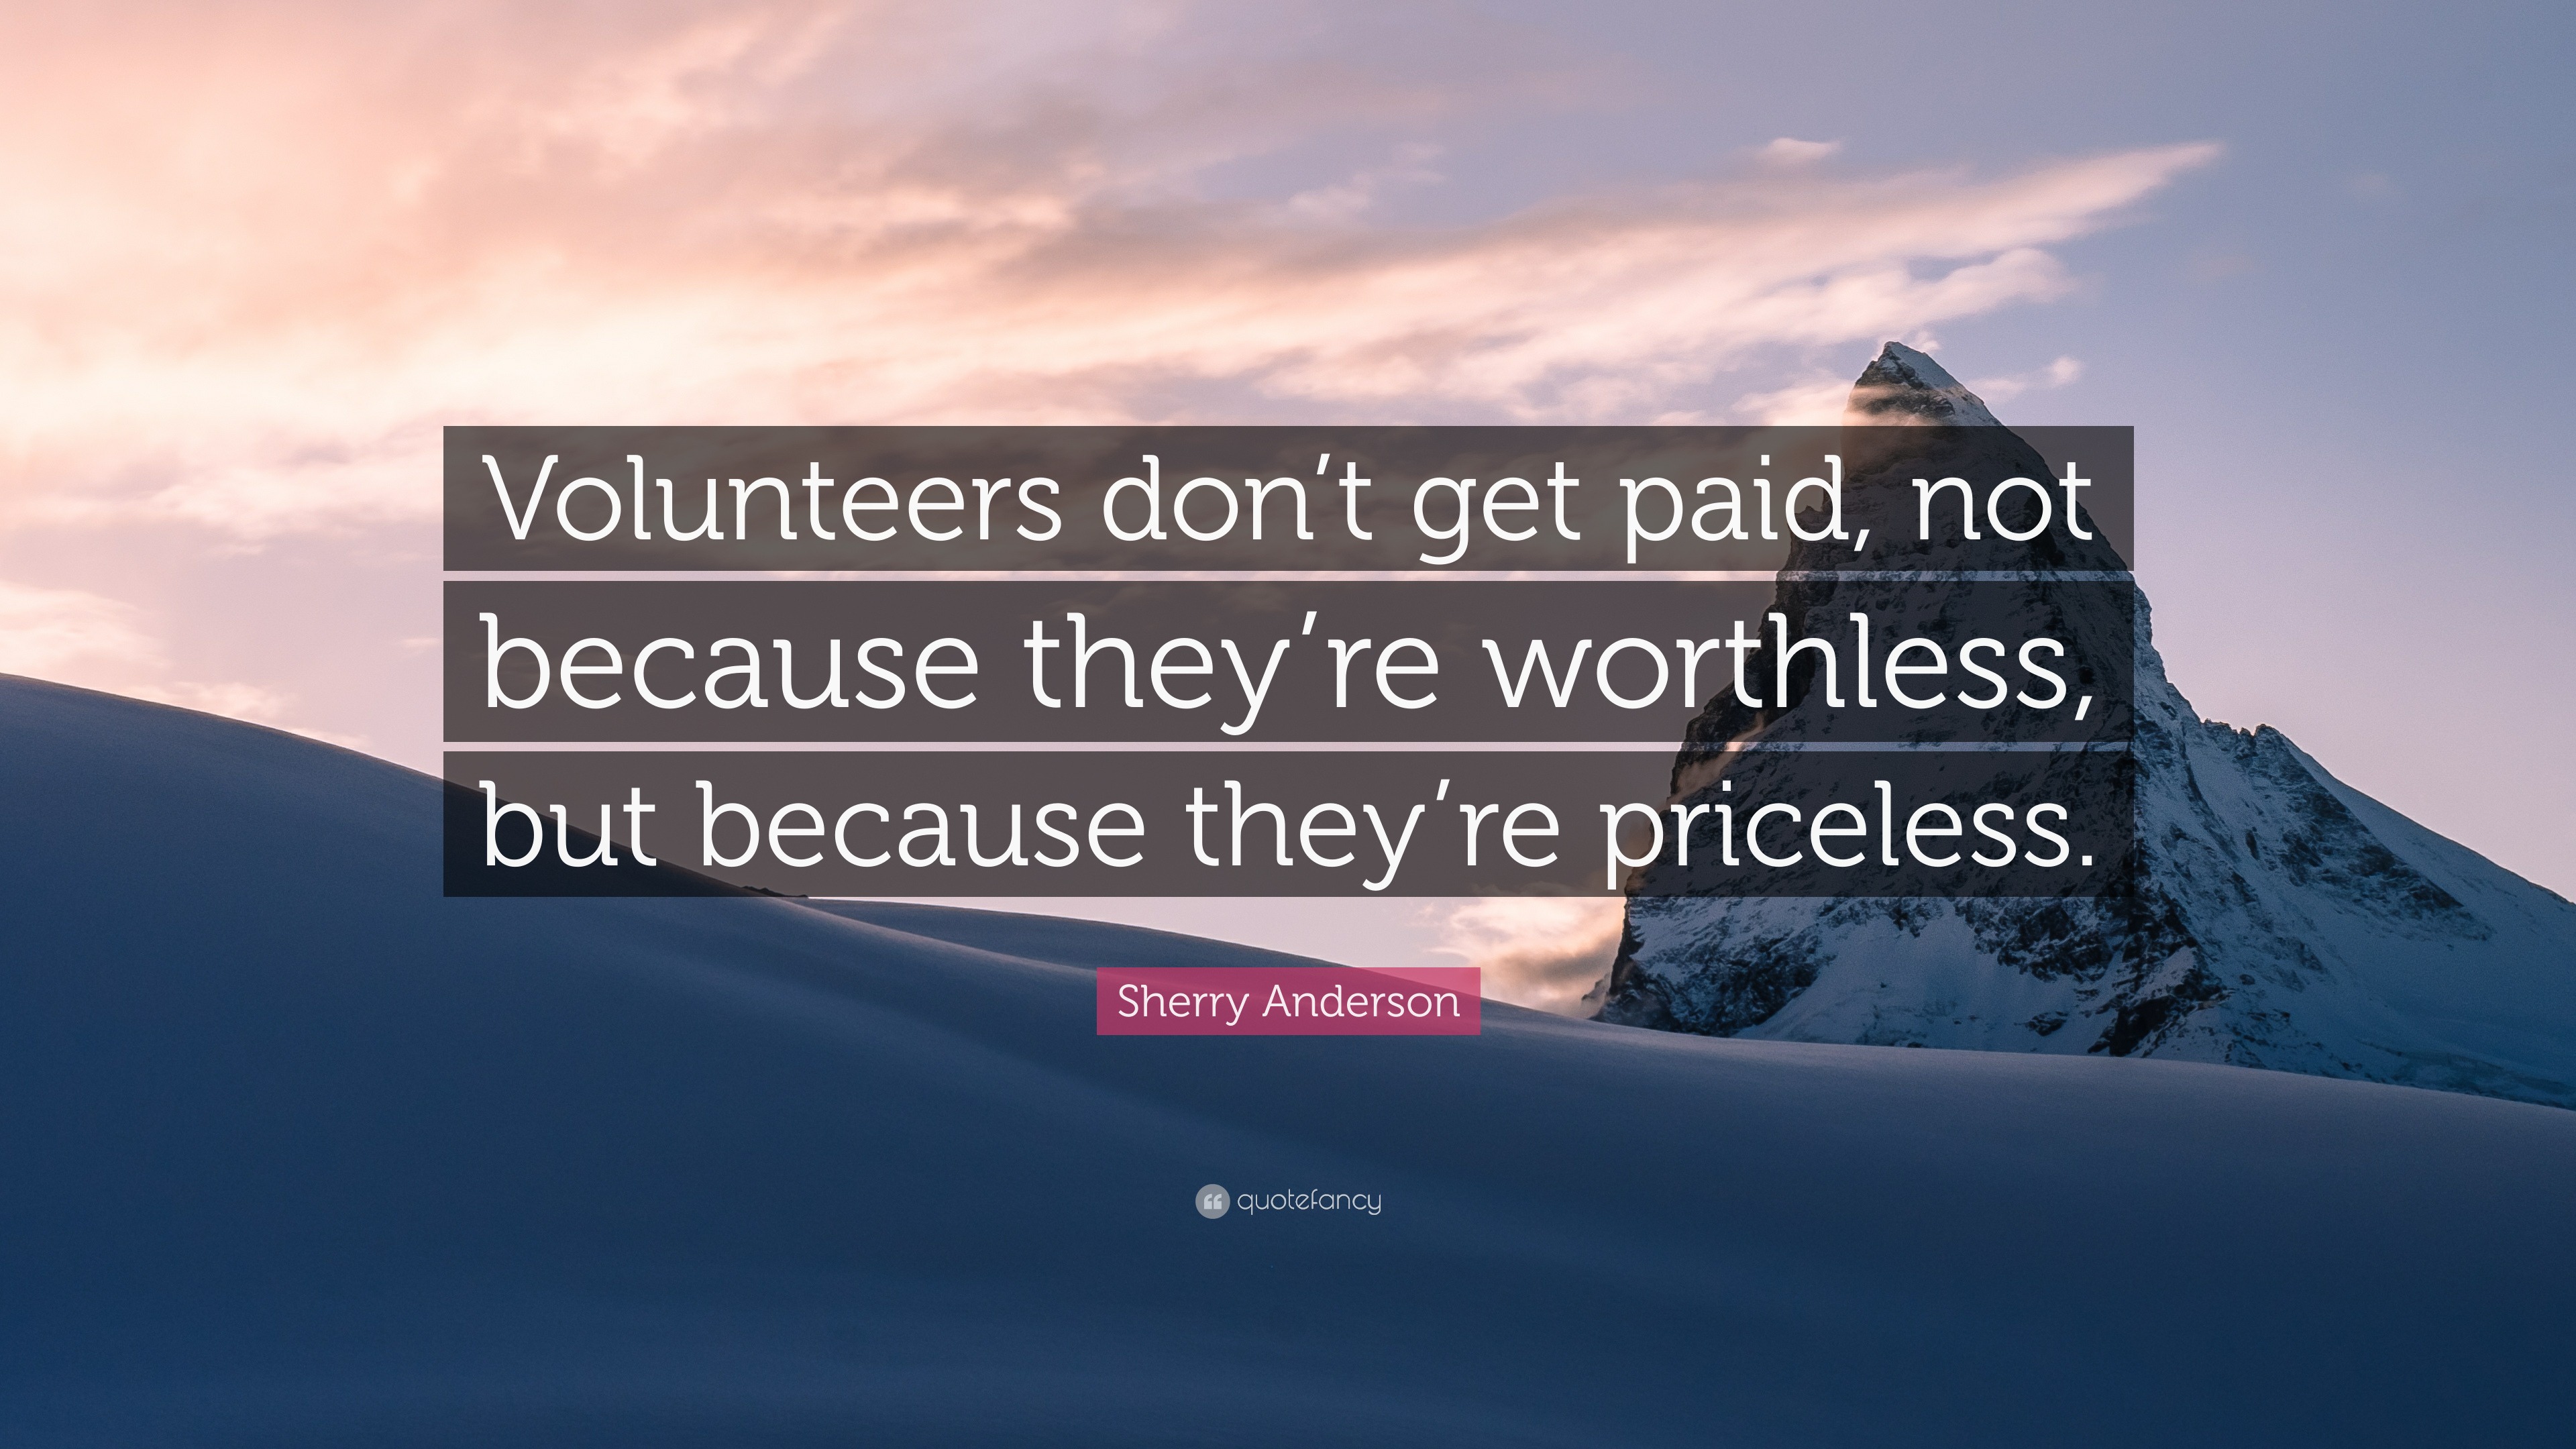 Sherry Anderson Quote “Volunteers don’t get paid, not